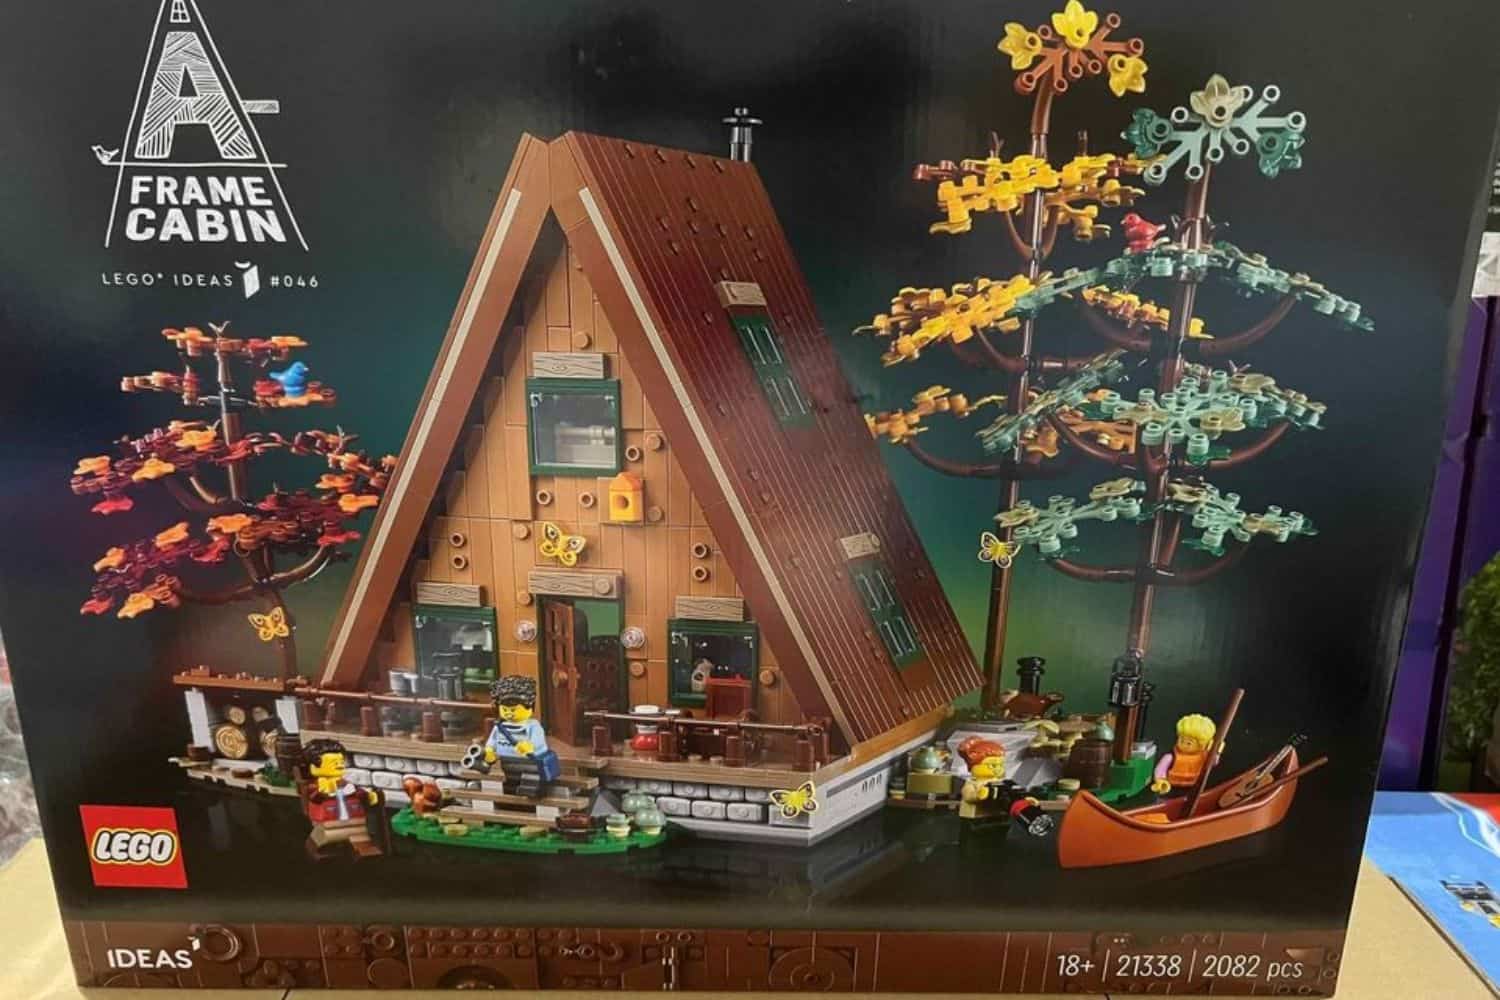 LEGO 21338 A Frame Cabin Review 